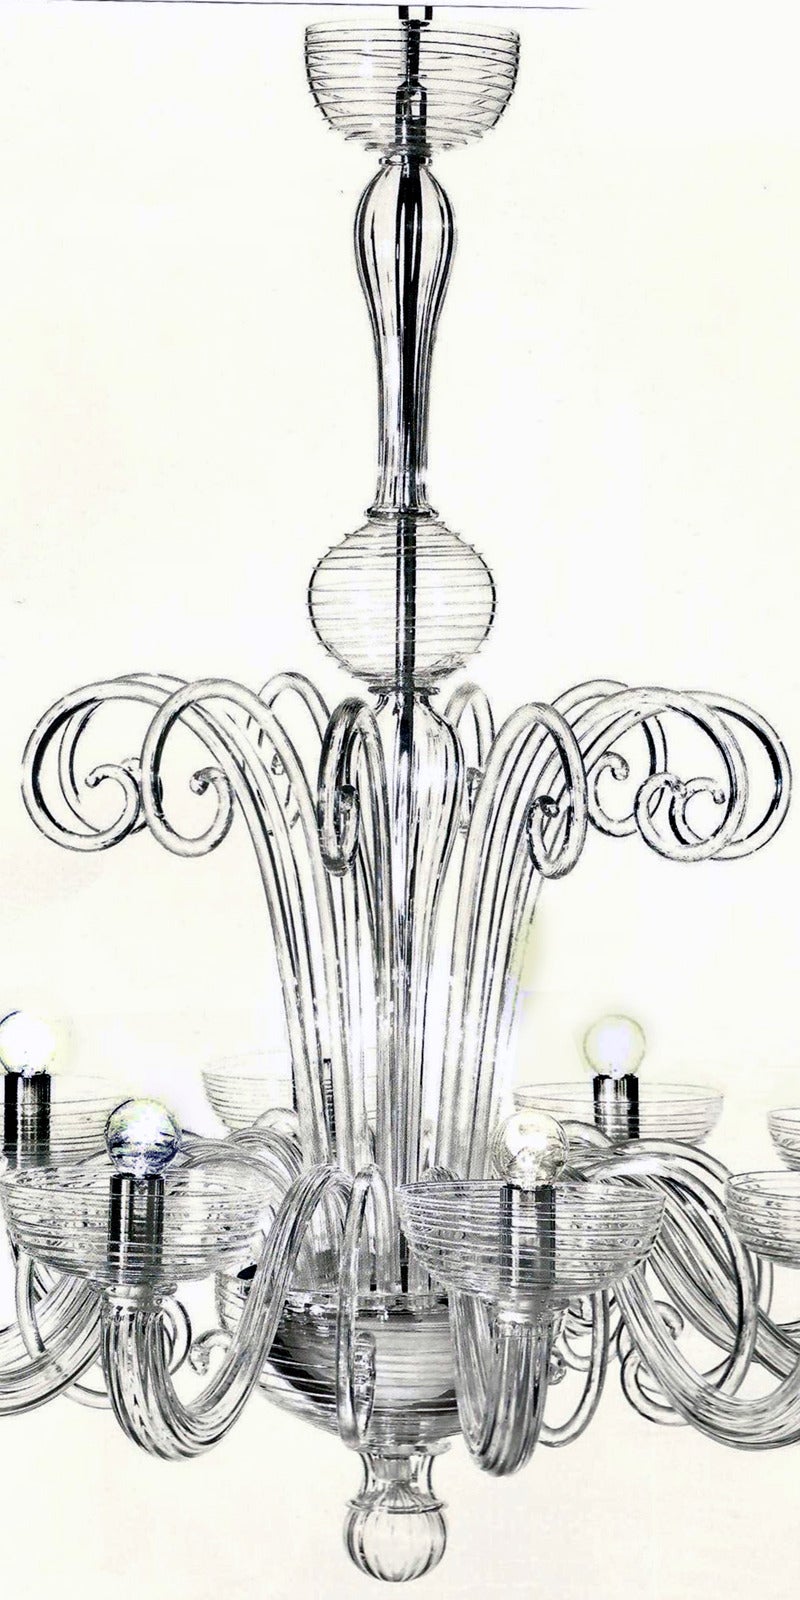 2 elegant Italian / Venetian glass chandeliers in the Mid-Century Modern 1930s spirit in clear hand blown glass and with ten arms. Each Chandelier is USA wired and takes ten chandelier bulbs at up to 60 watts each. Height is 37.38 without chain and